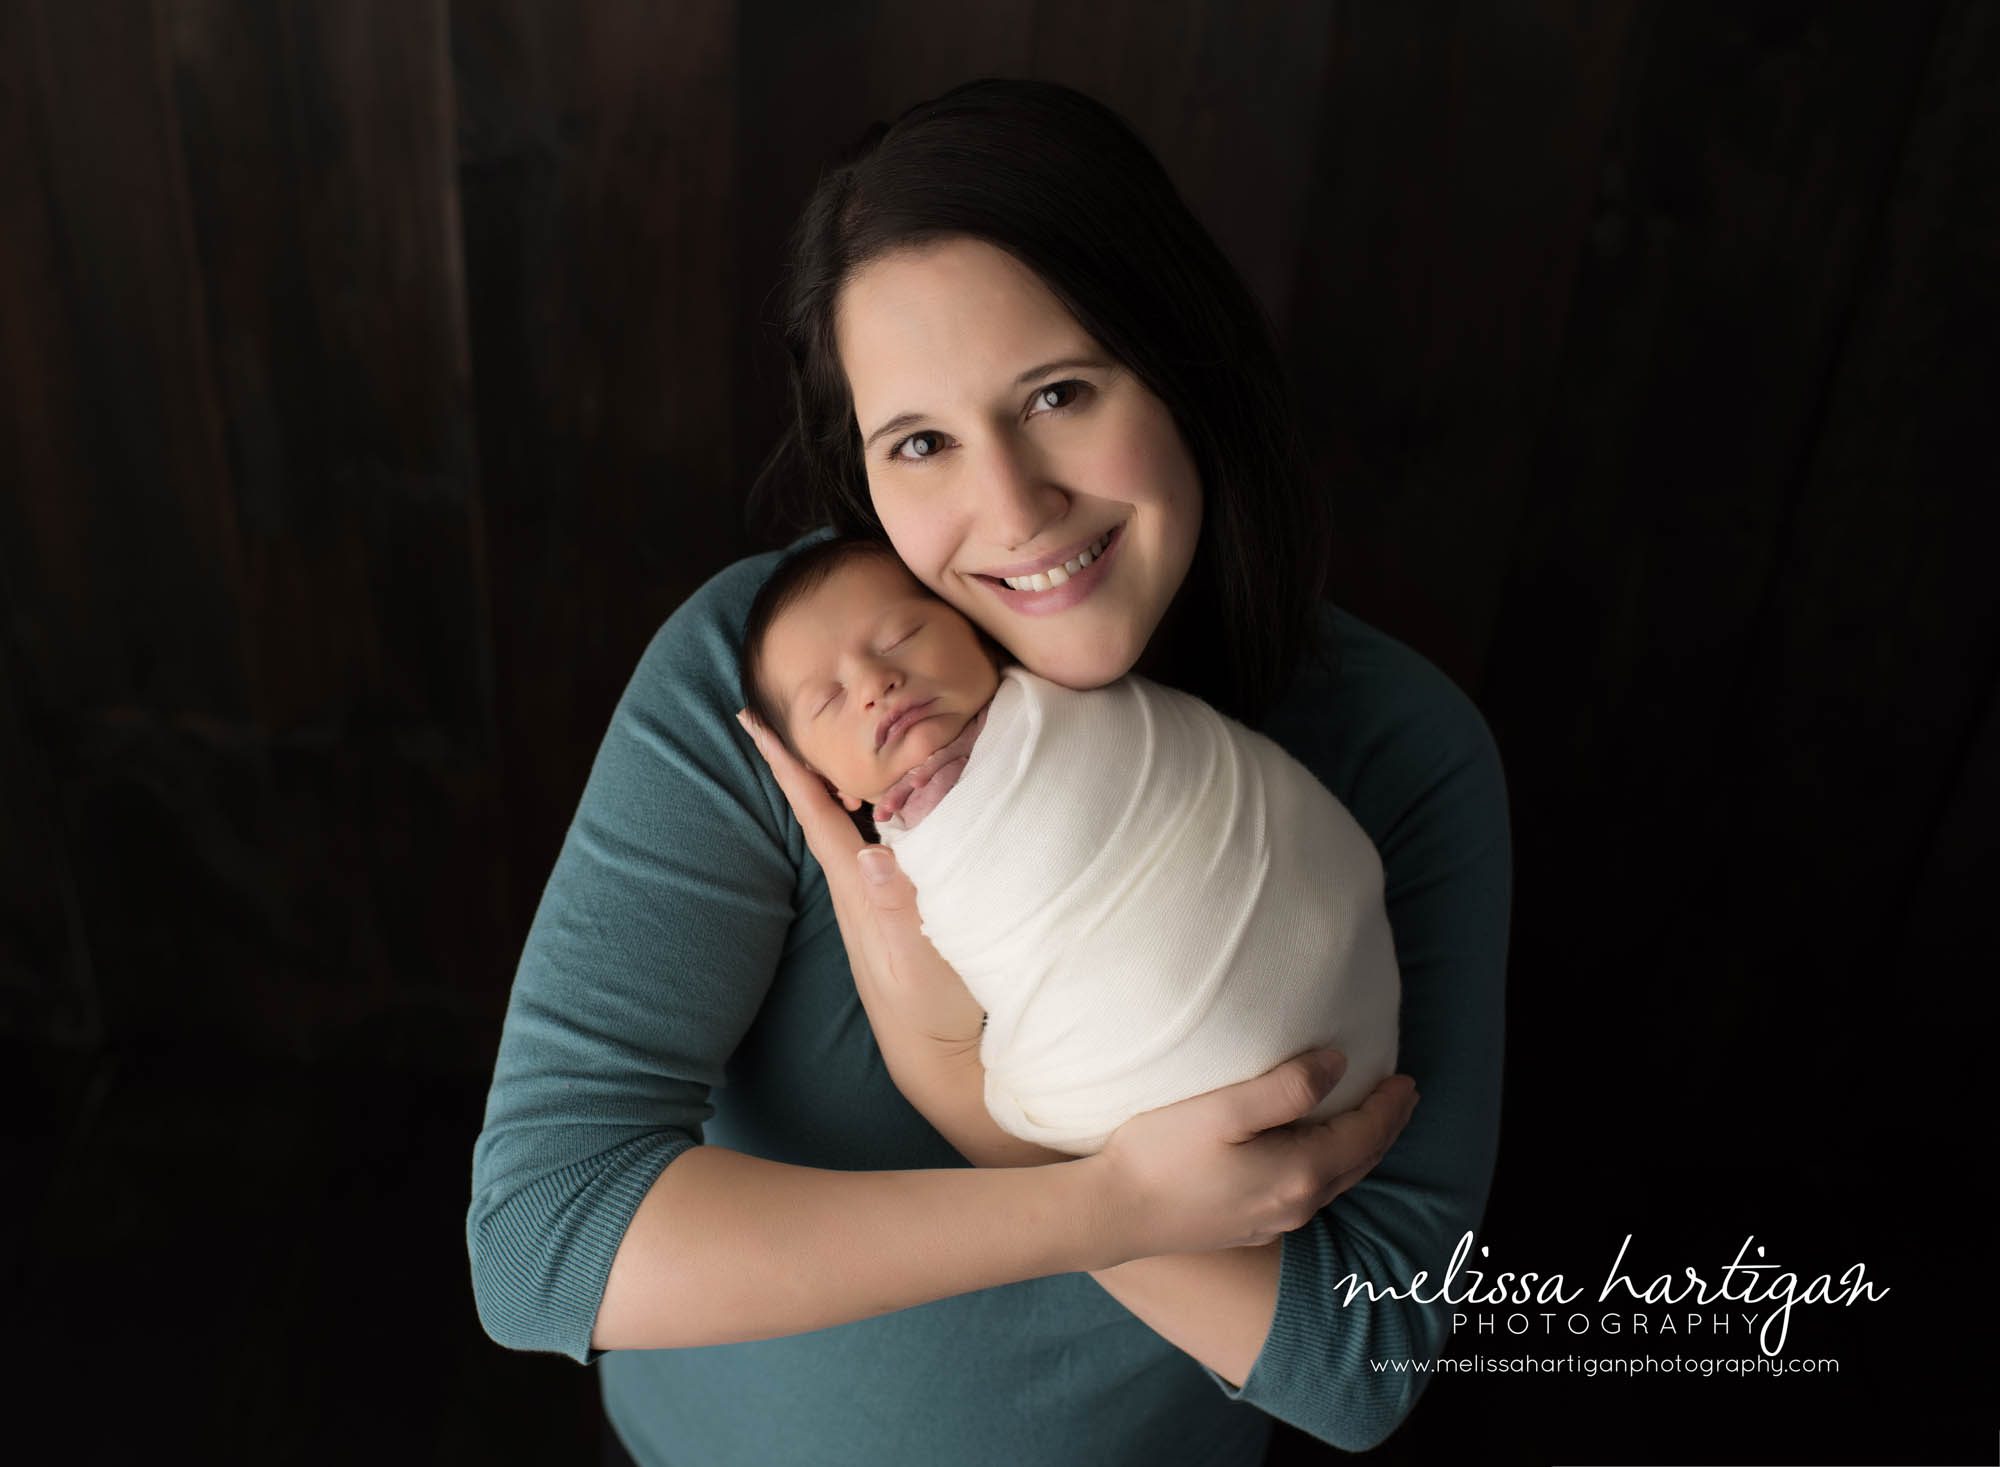 Melissa Hartigan Photography Maternity and Newborn Connecticut Photographer Brayden Mini Newborn Session Baby boy wrapped in cream held by mom smiling